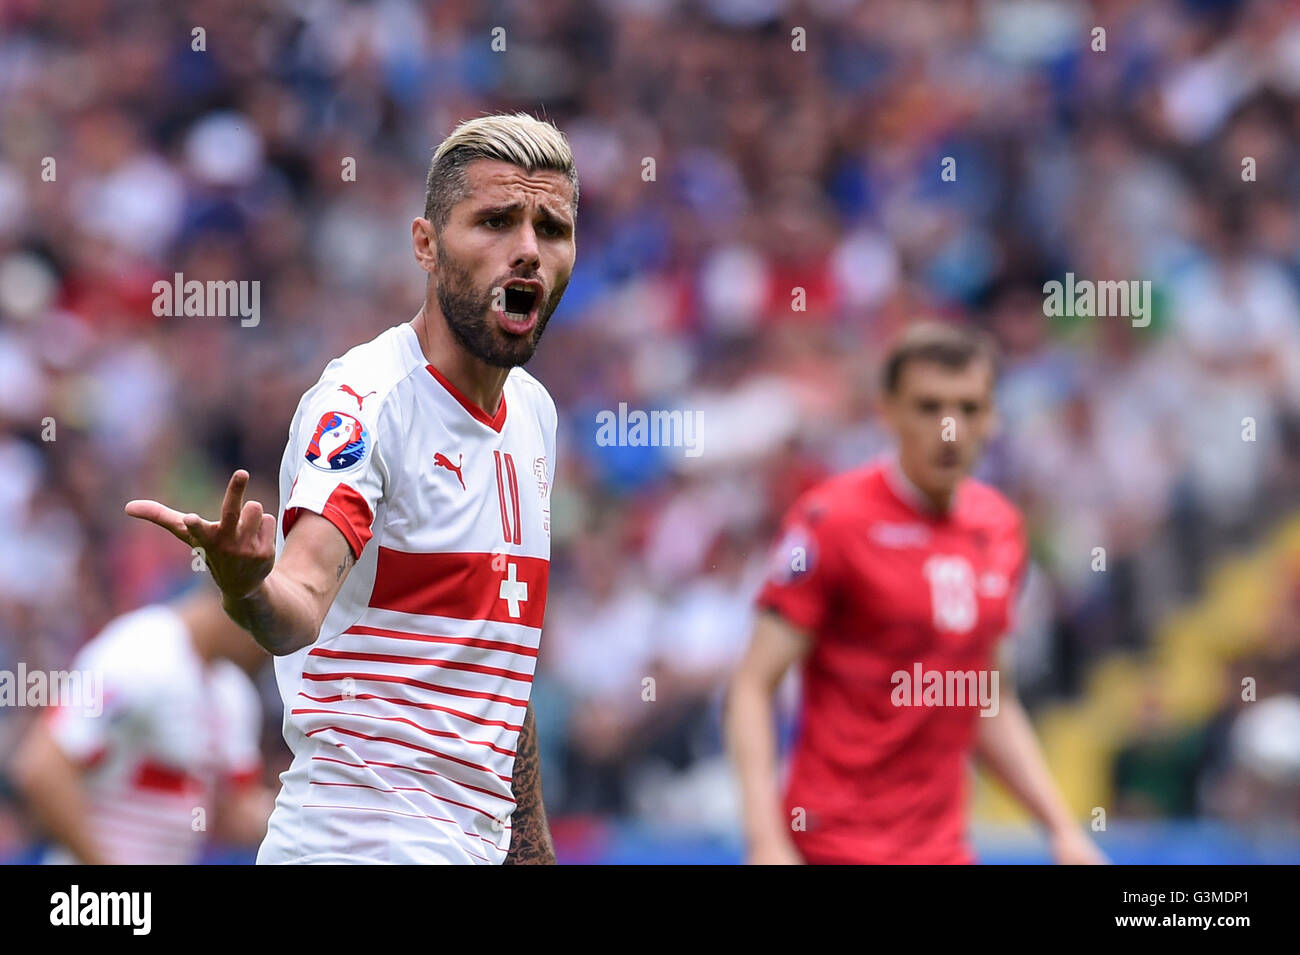 Valon Behrami (SUI), JUNE 11, 2016 - Football / Soccer : UEFA EURO 2016 Group A match between Albania 0-1 Switzerland at Stade Bollaert-Delelis in Lens, France. (Photo by aicfoto/AFLO) Stock Photo